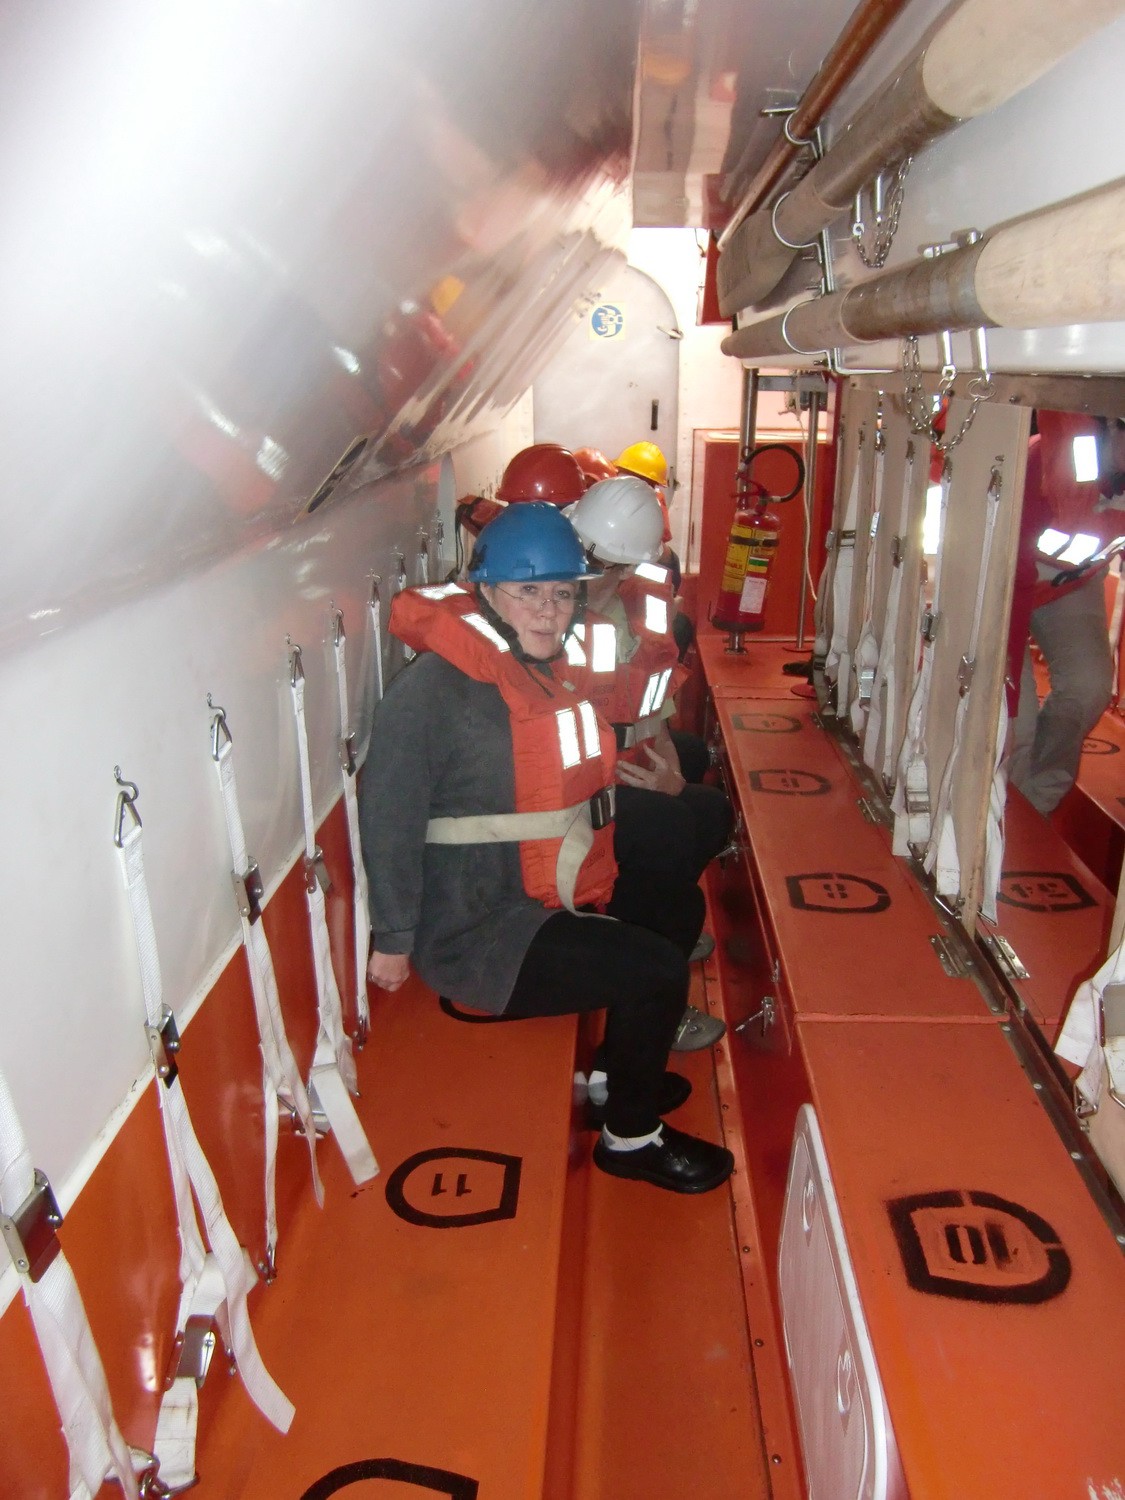 Inside the lifeboat